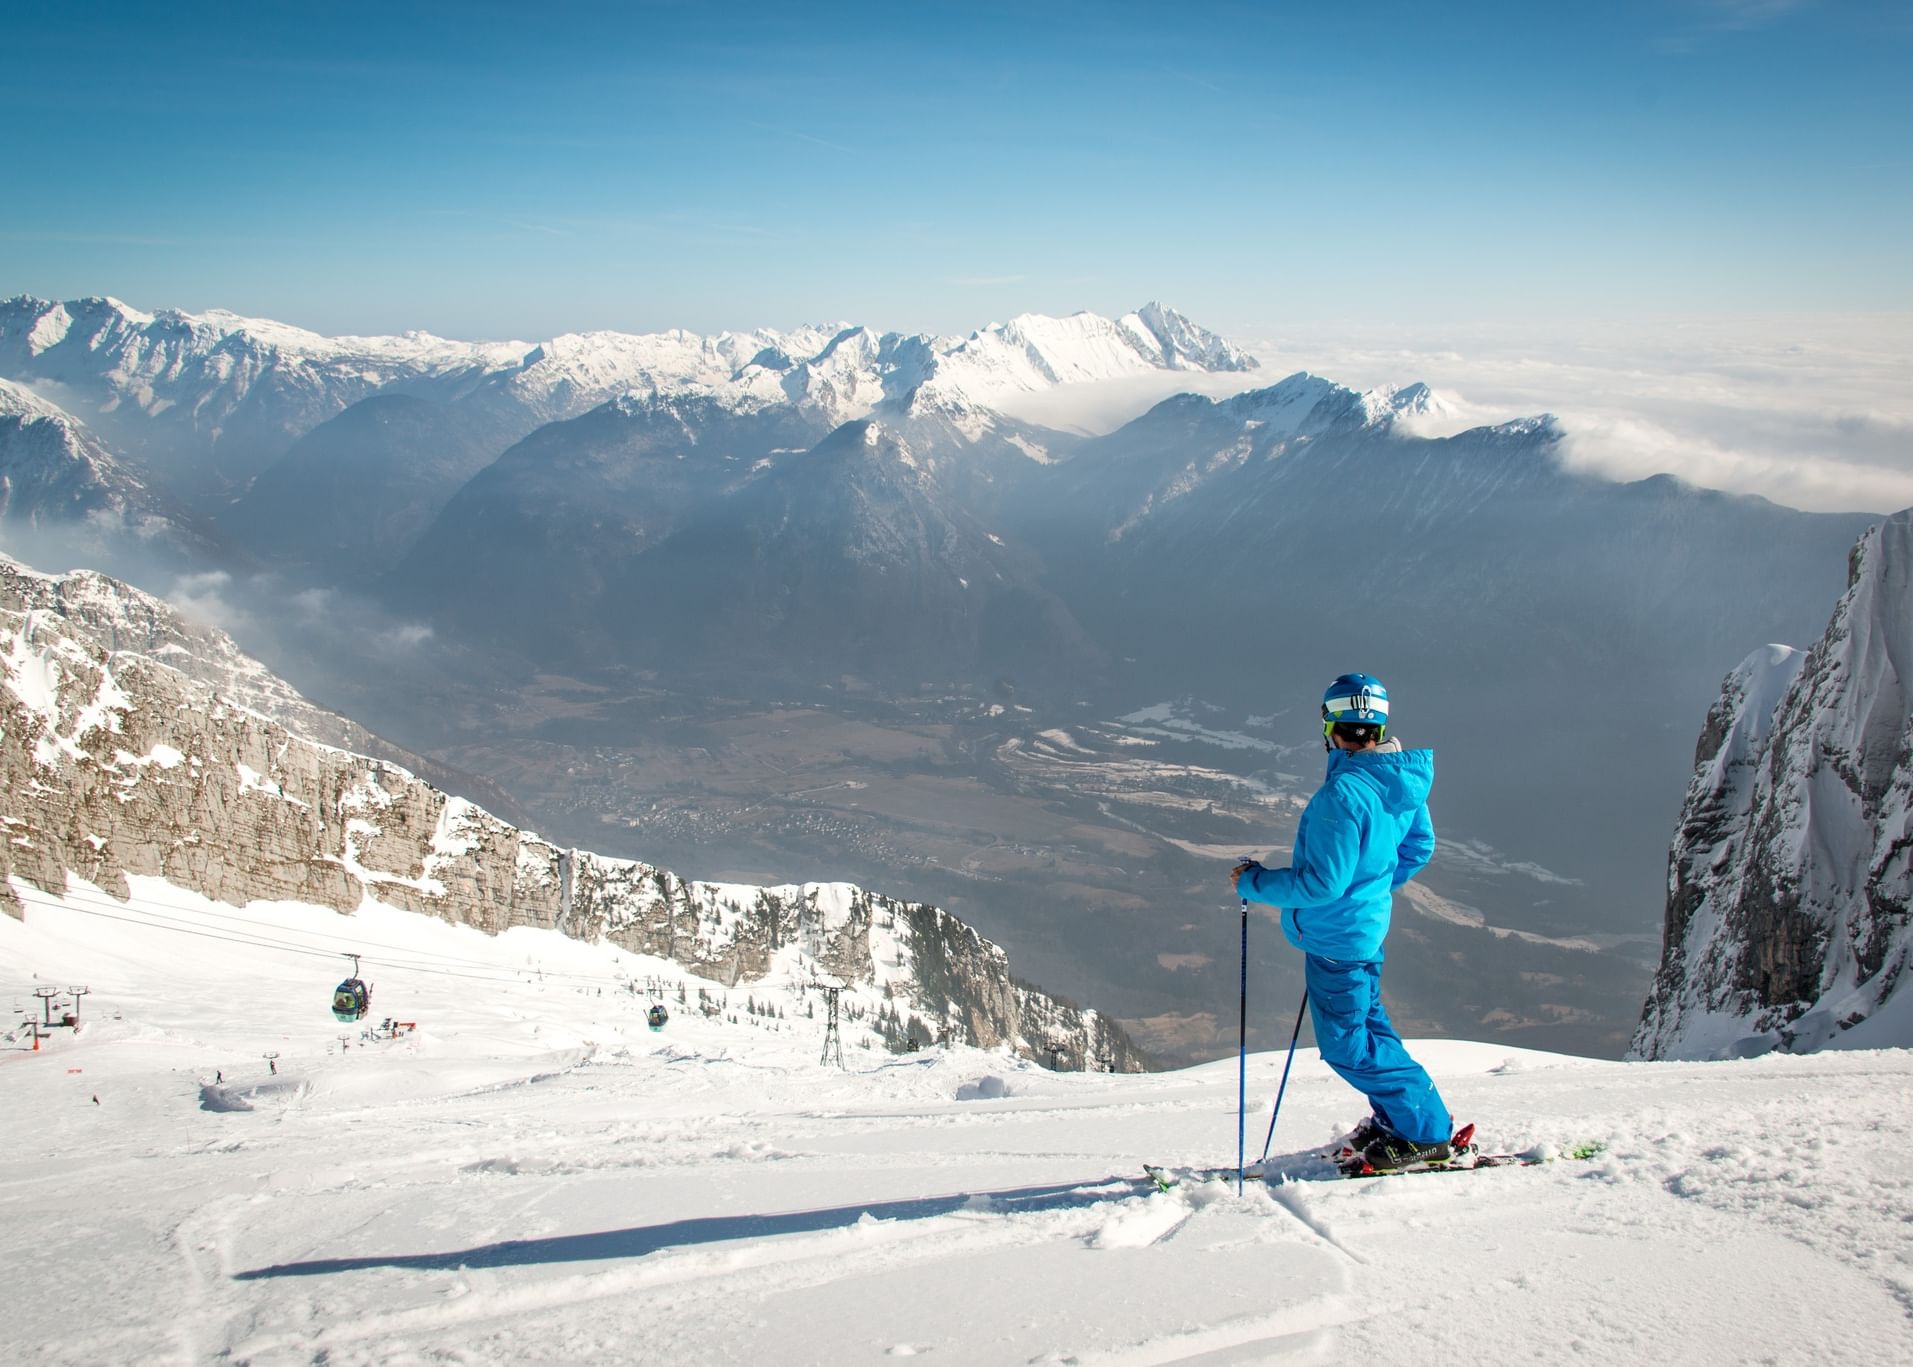 Kanin is the highest skicenter in Slovenia, connected with 🇮🇹 Sella Nevea 👉 and overlooking the Alps & the Adriatic Sea